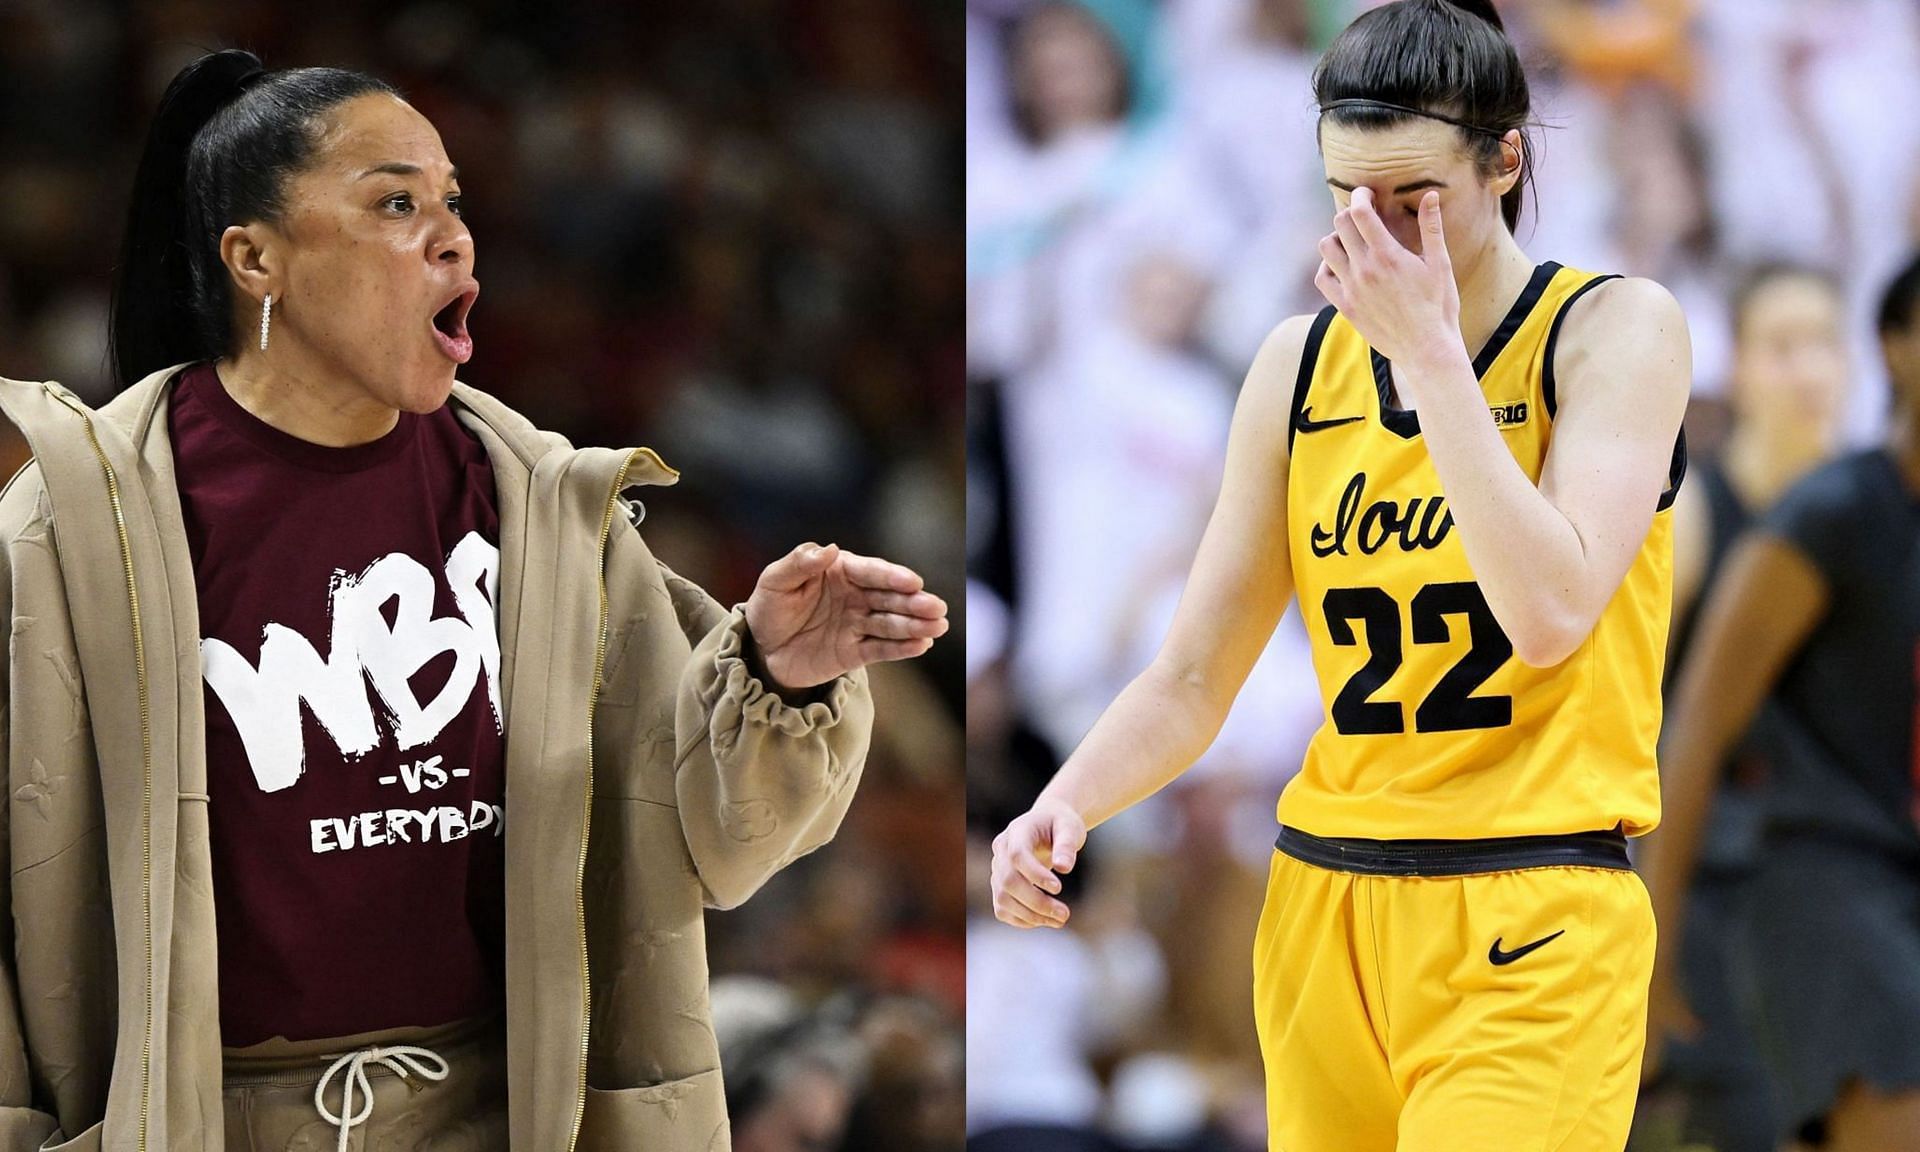 South Carolina HC Dawn Staley appears to downplay Caitlin Clark&rsquo;s GOAT title.